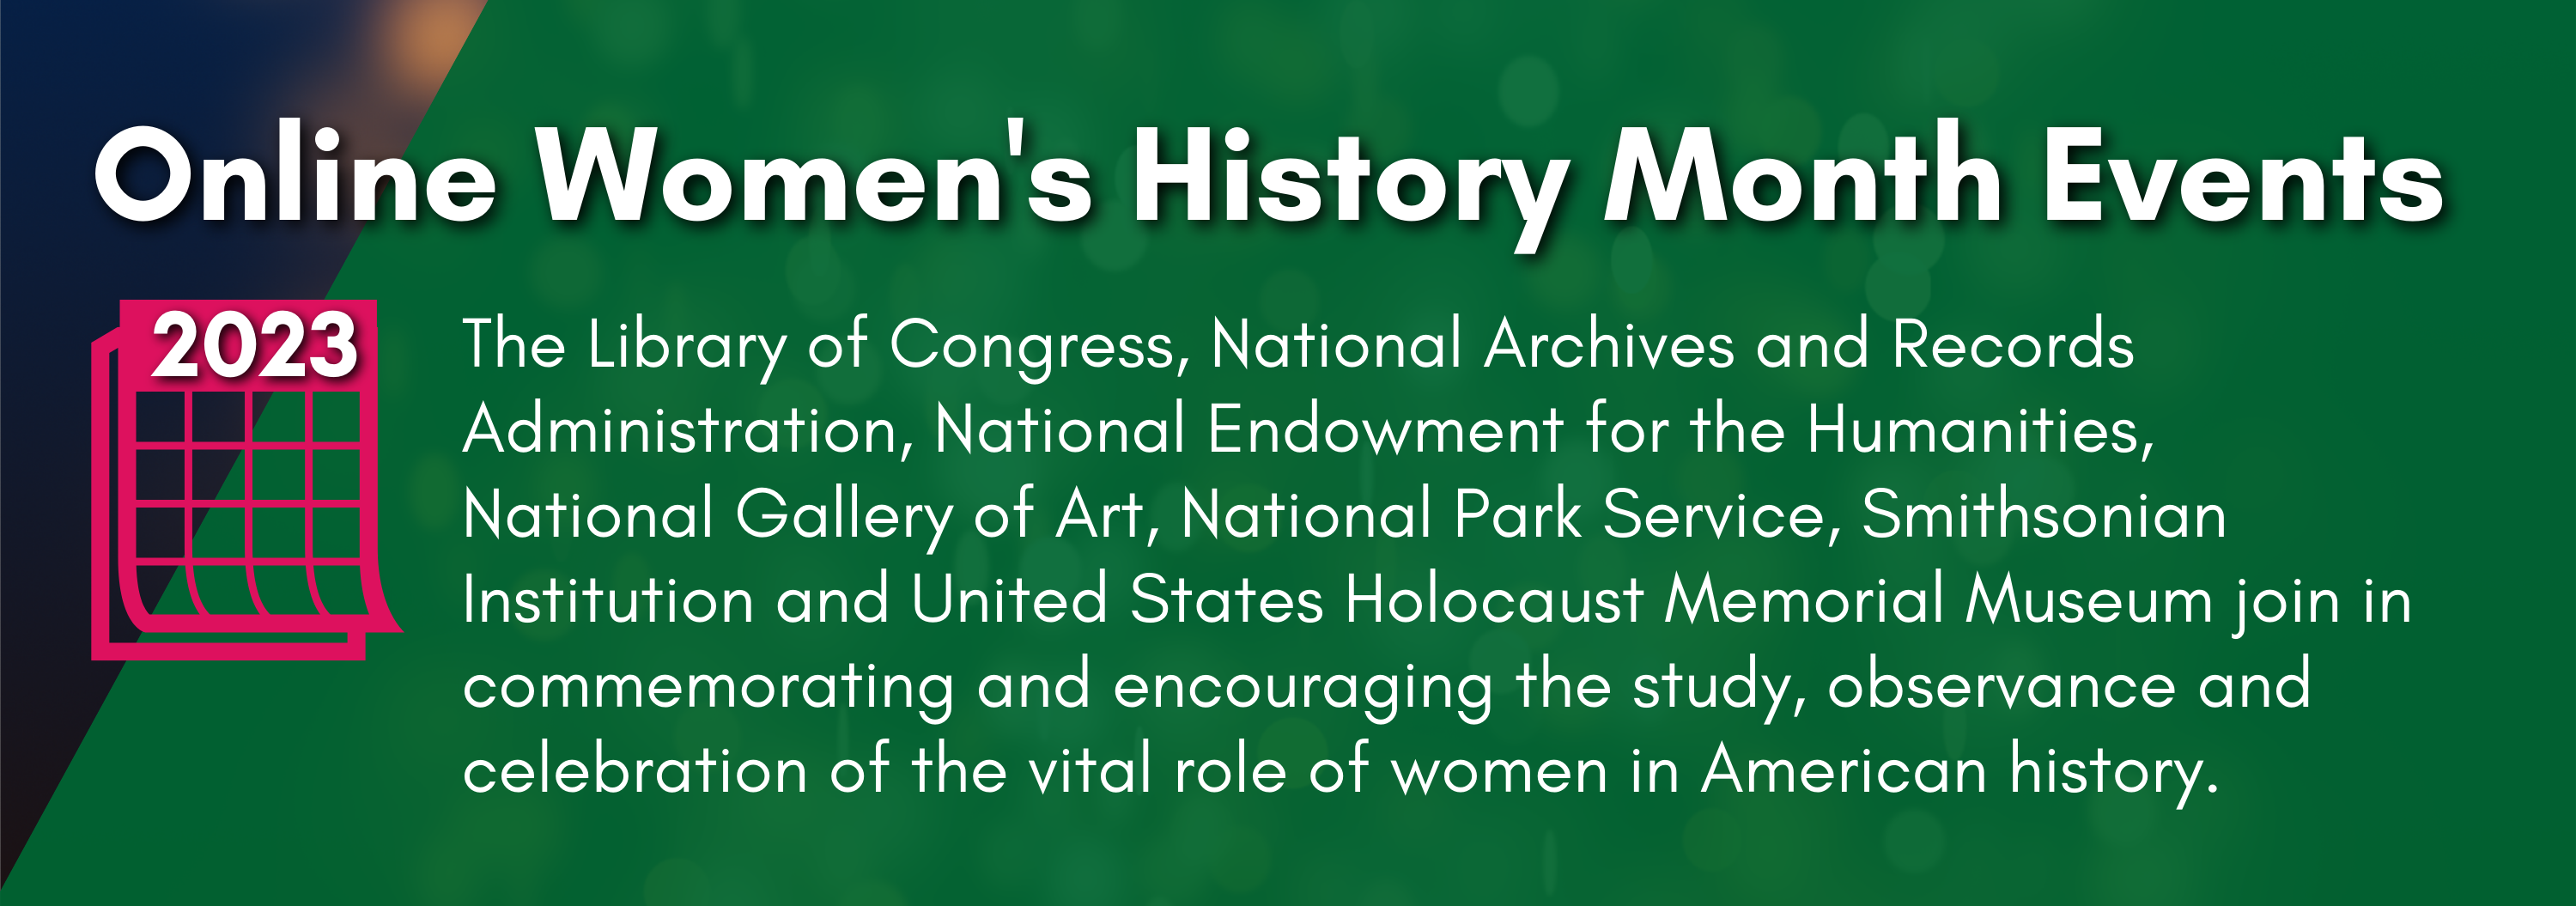 Women's History Month Online Events for 2023